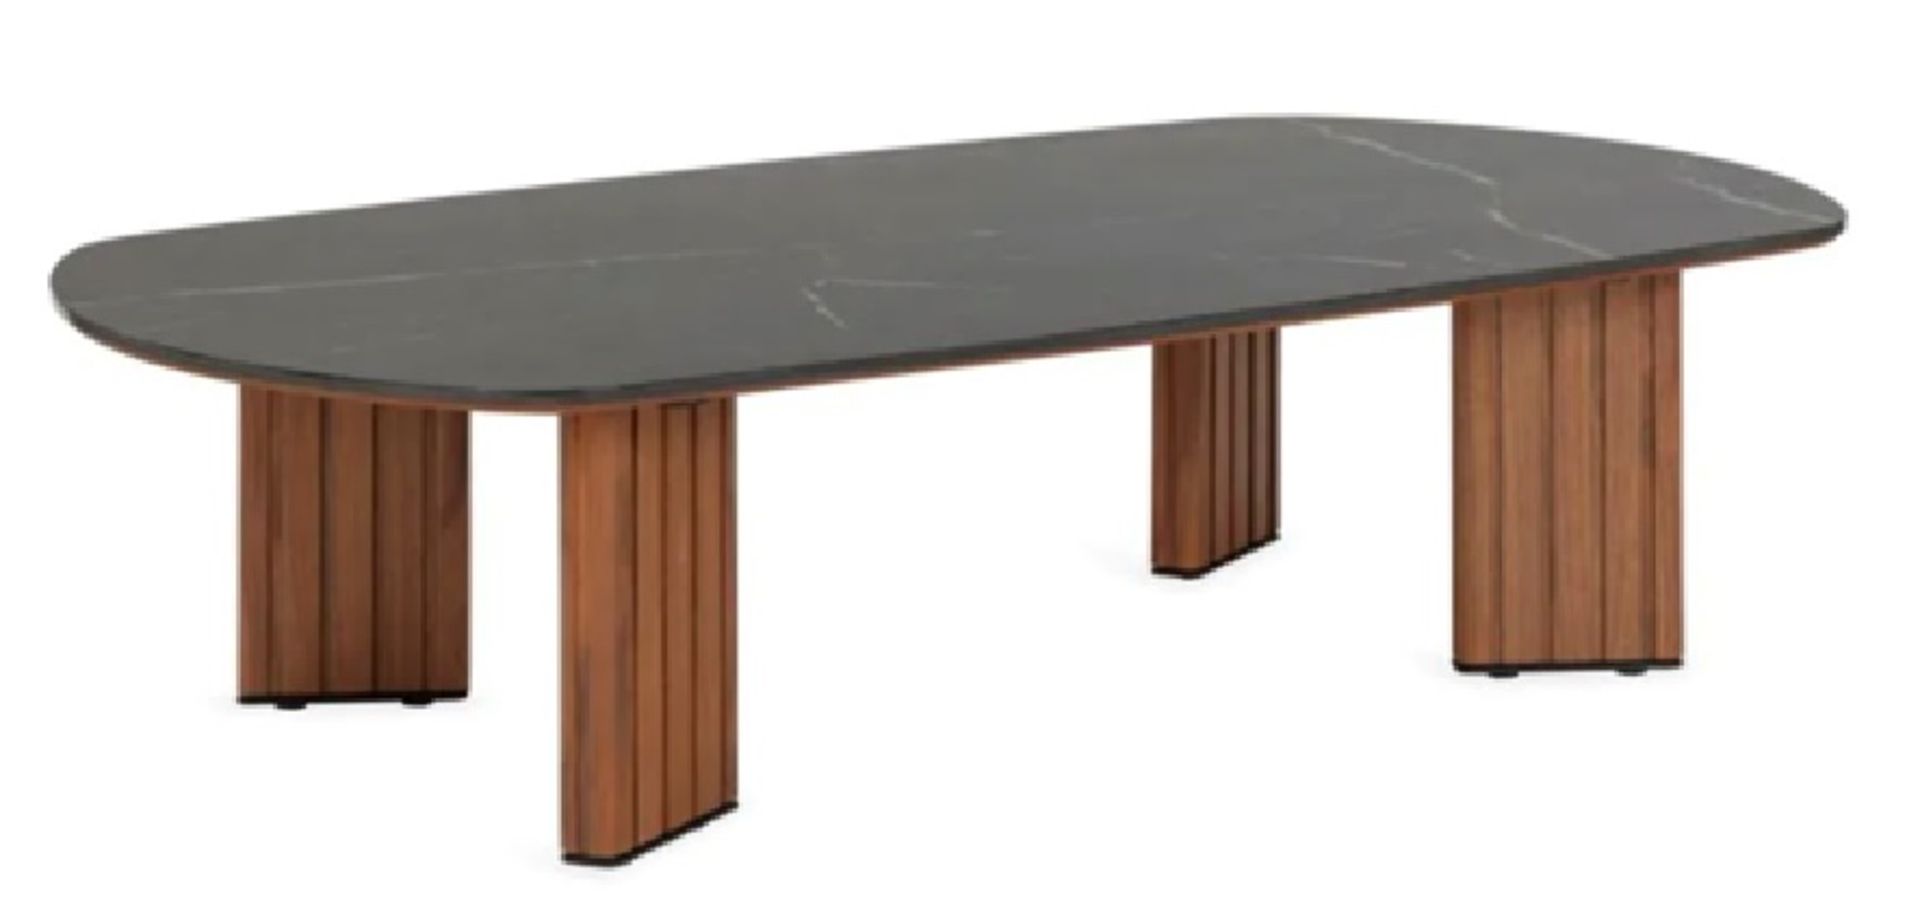 The Carl Cocktail Table is part of the Carl collection of mid century modern furniture. Designed